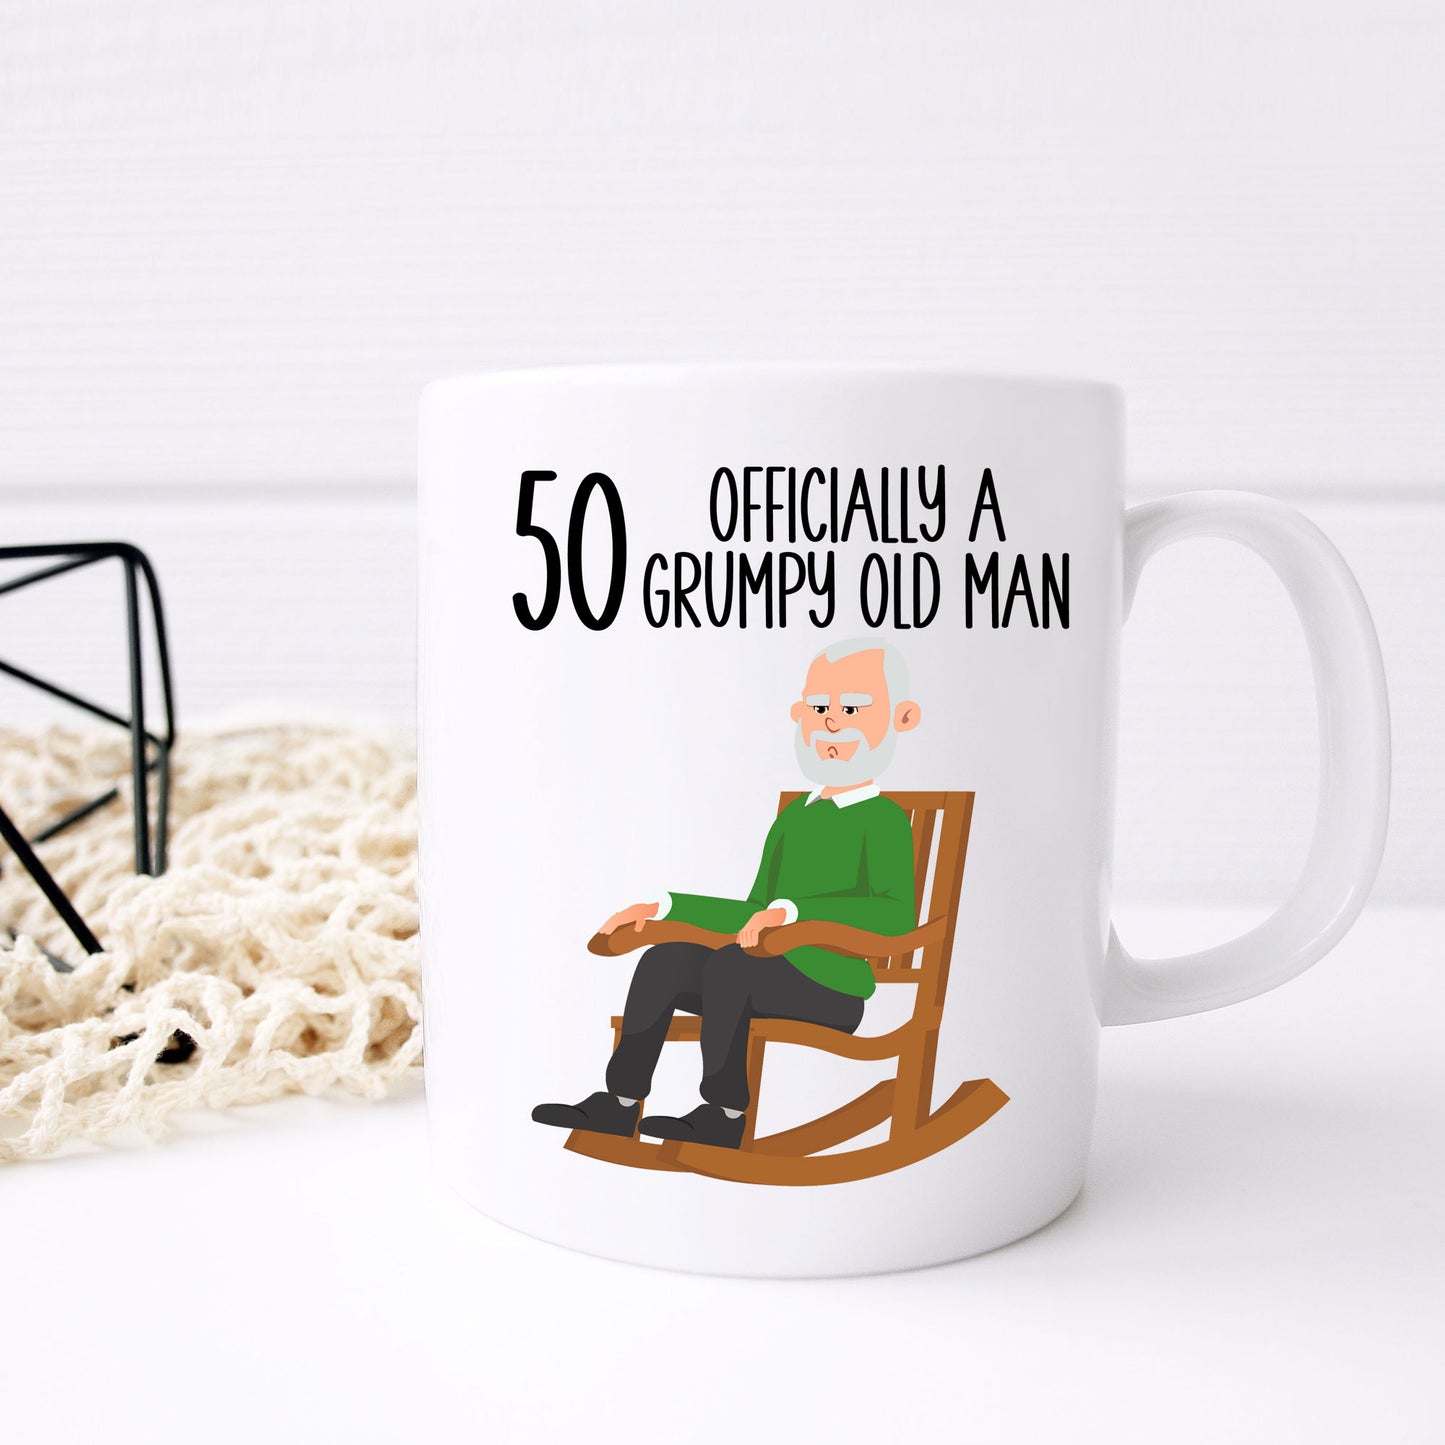 50 Officially A Grumpy Old Man Mug and/or Coaster Gift  - Always Looking Good - Mug On Its Own  